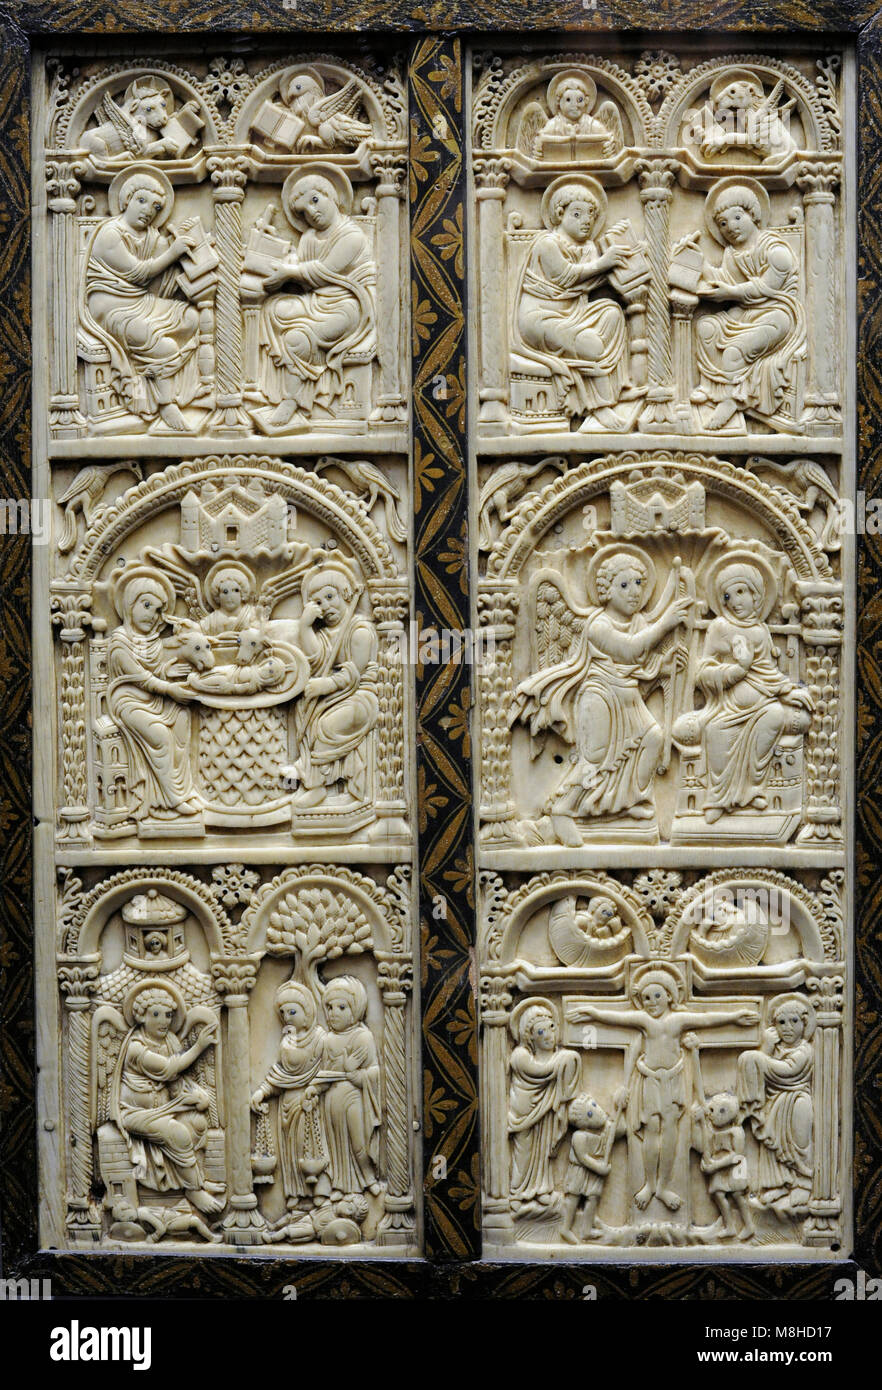 Harrach Diptych. Court School of Charlemagne, c. 800. Reverse. From Spain or northern Italy, c. 700-750. Ivory. Museum Schnütgen. Cologne, Germany. Stock Photo